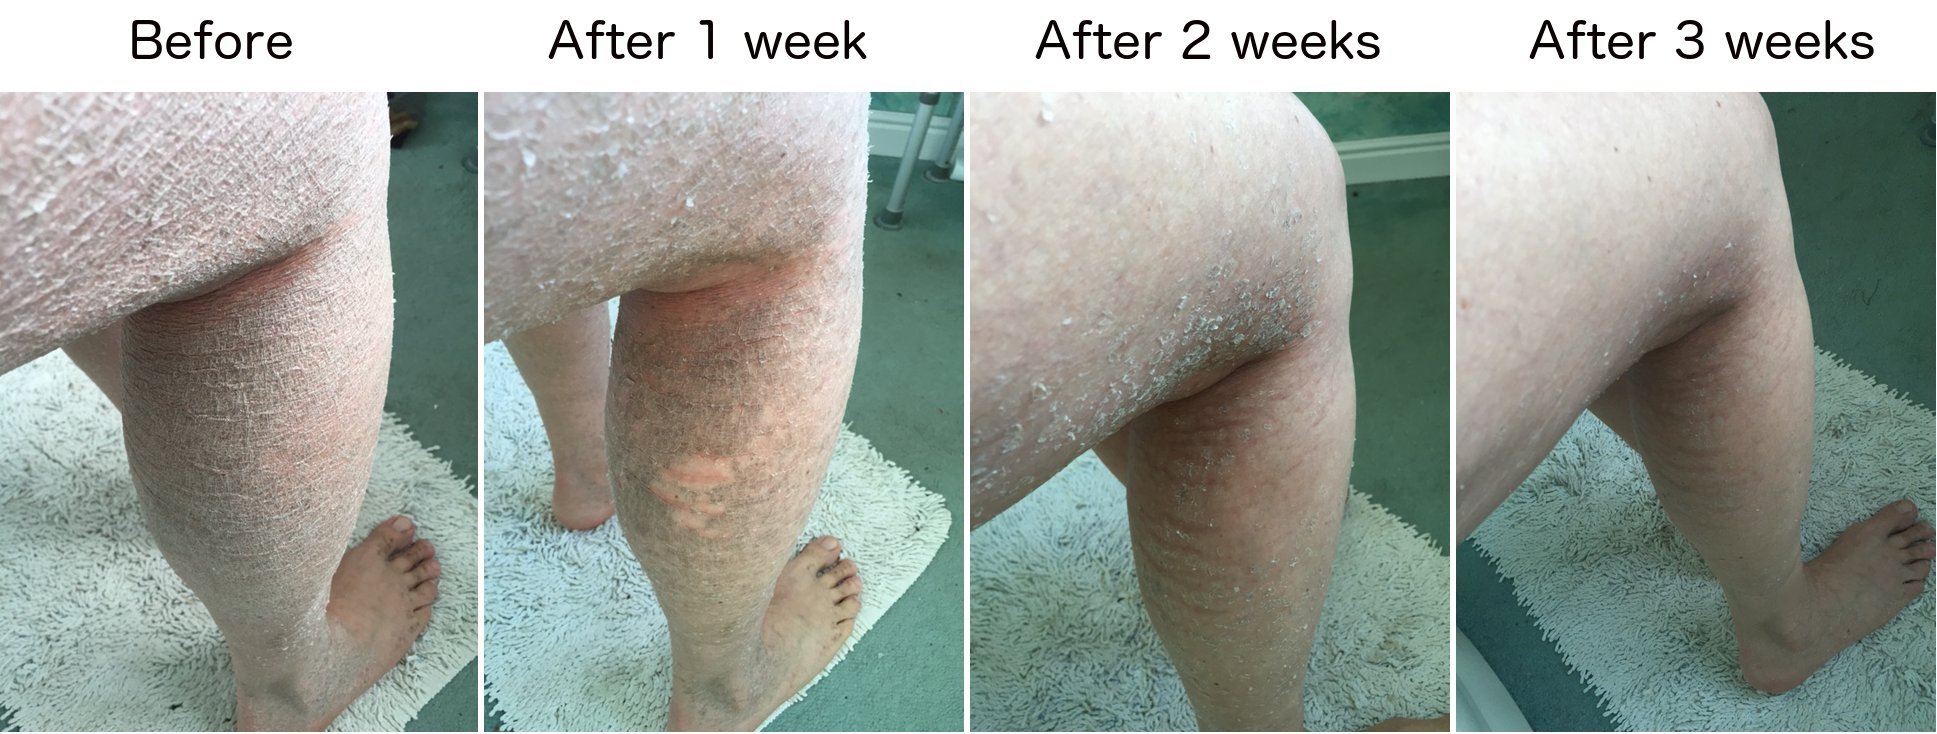 G16 Skin Repair Lotion, Excellent Ichthyosis Treatment Cream, Outstanding Results in 2 Weeks by G16